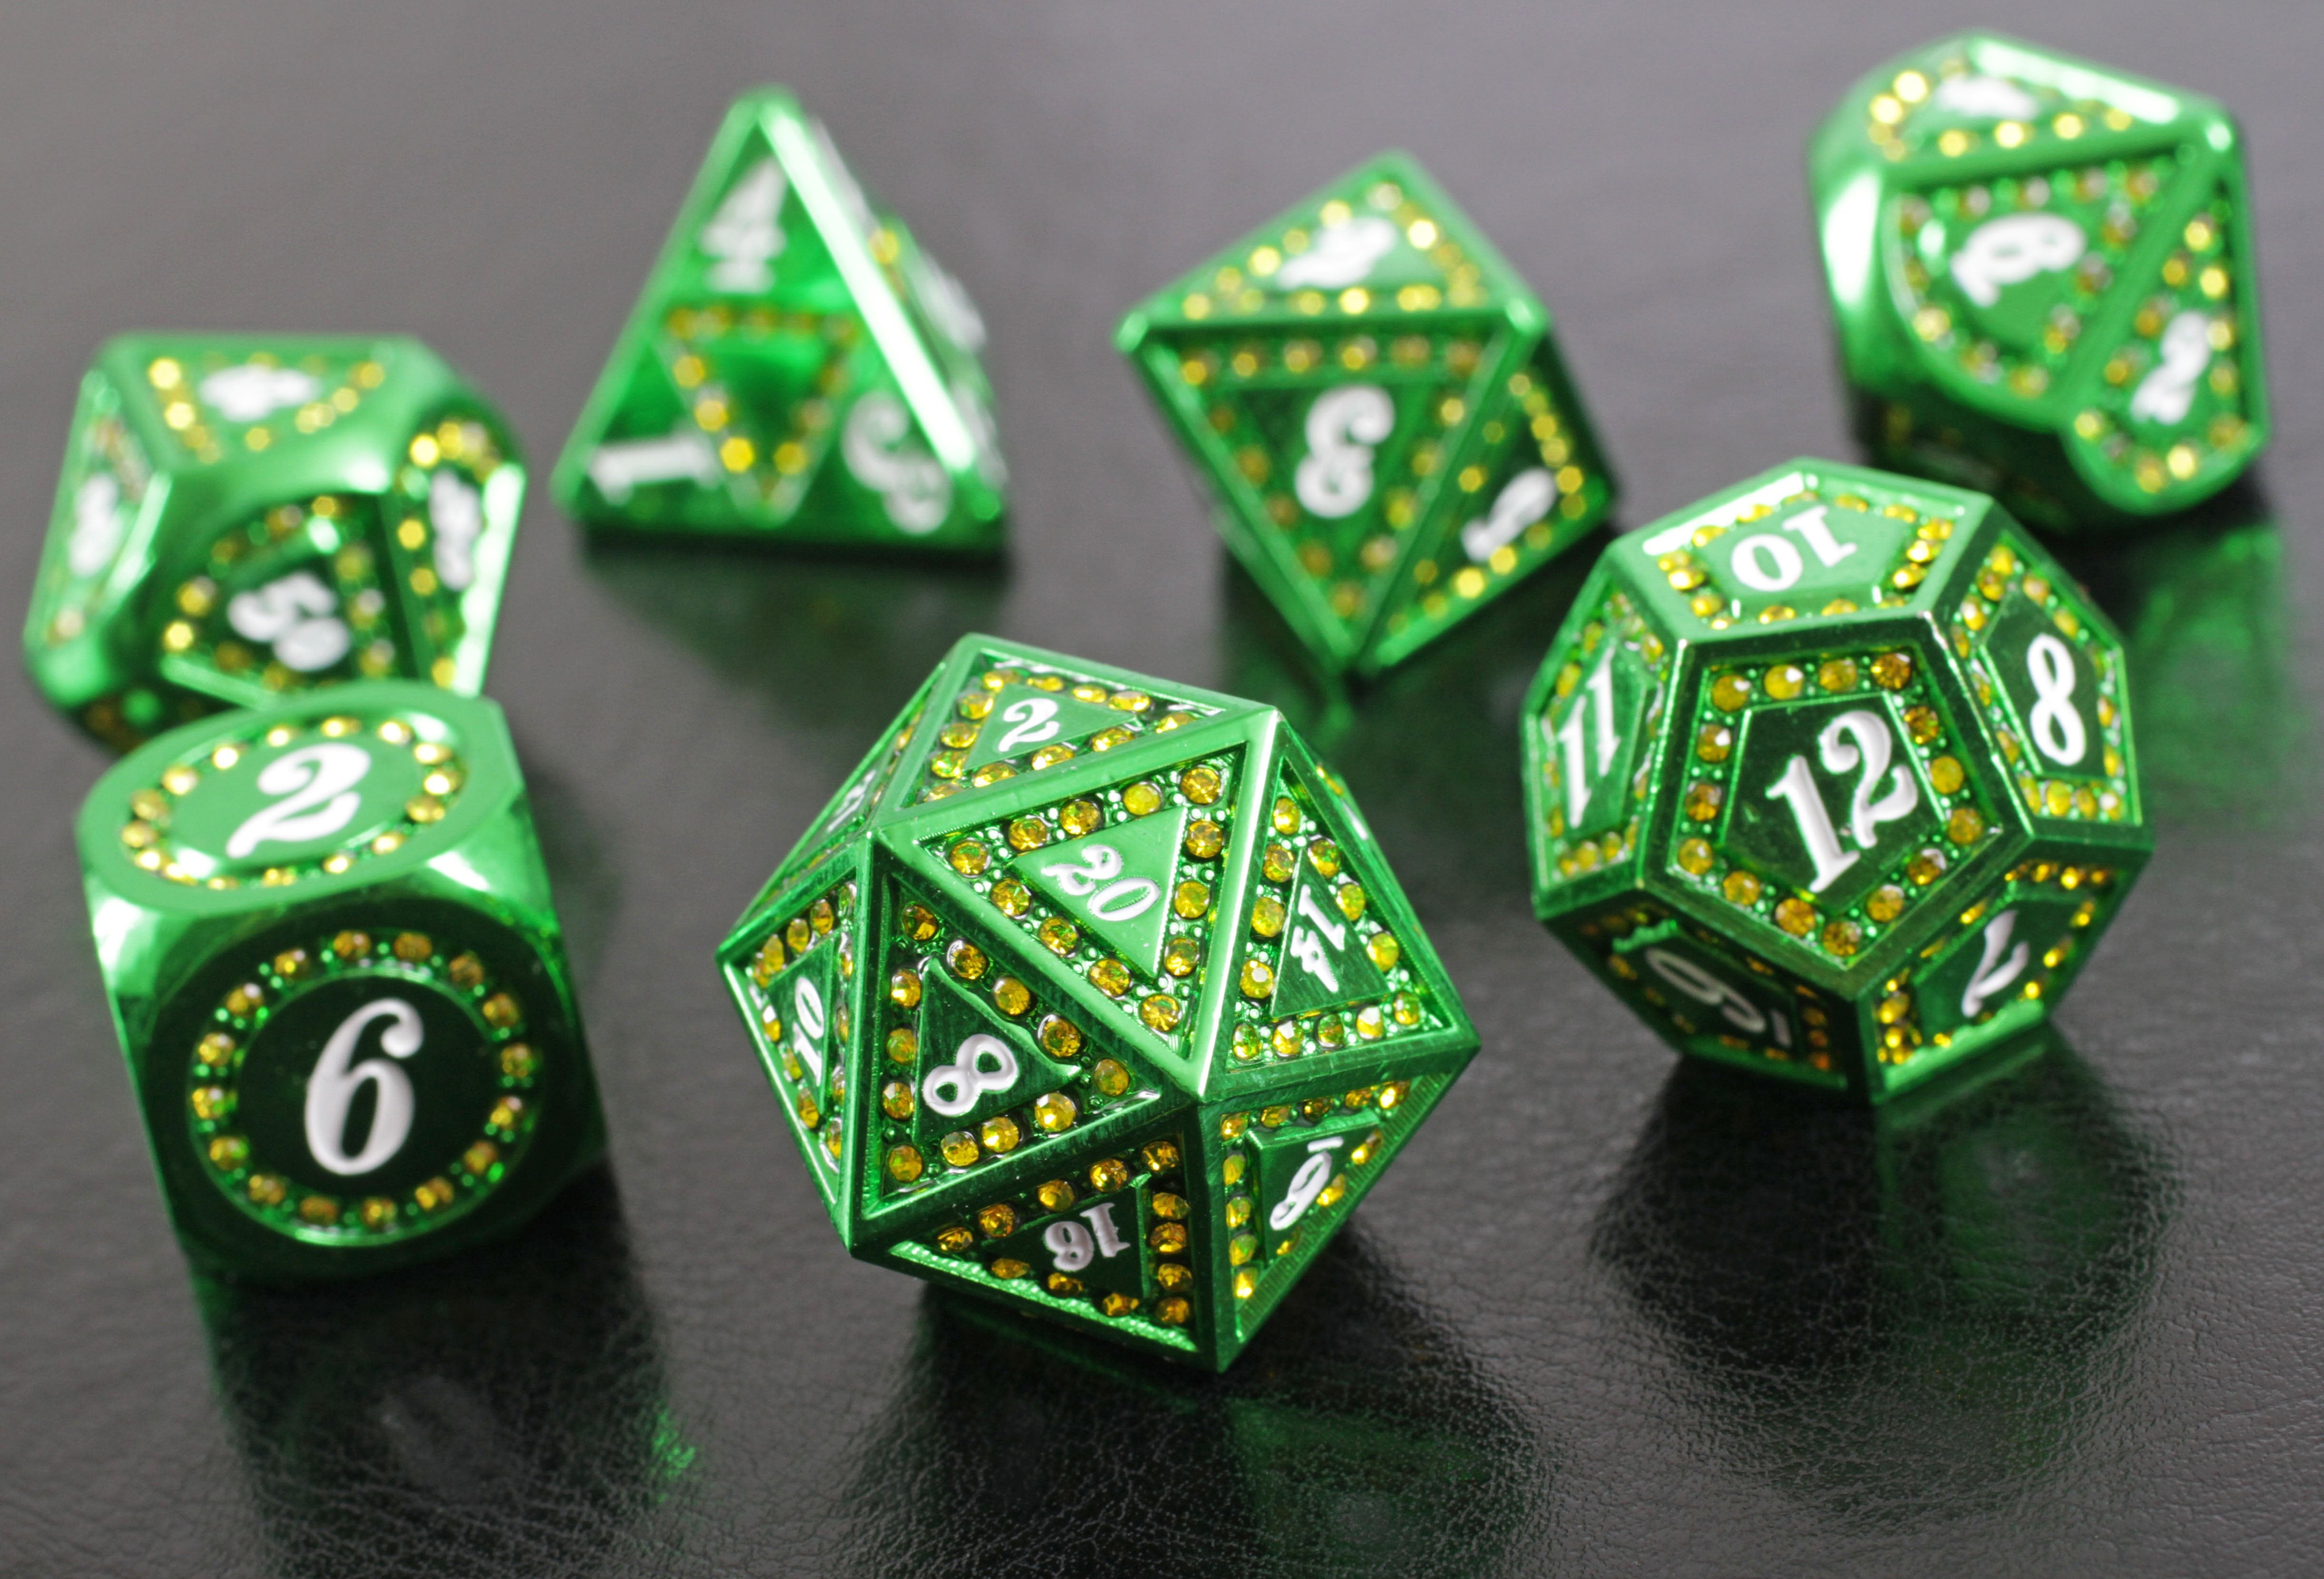 Role-Playing Dice Game Explained